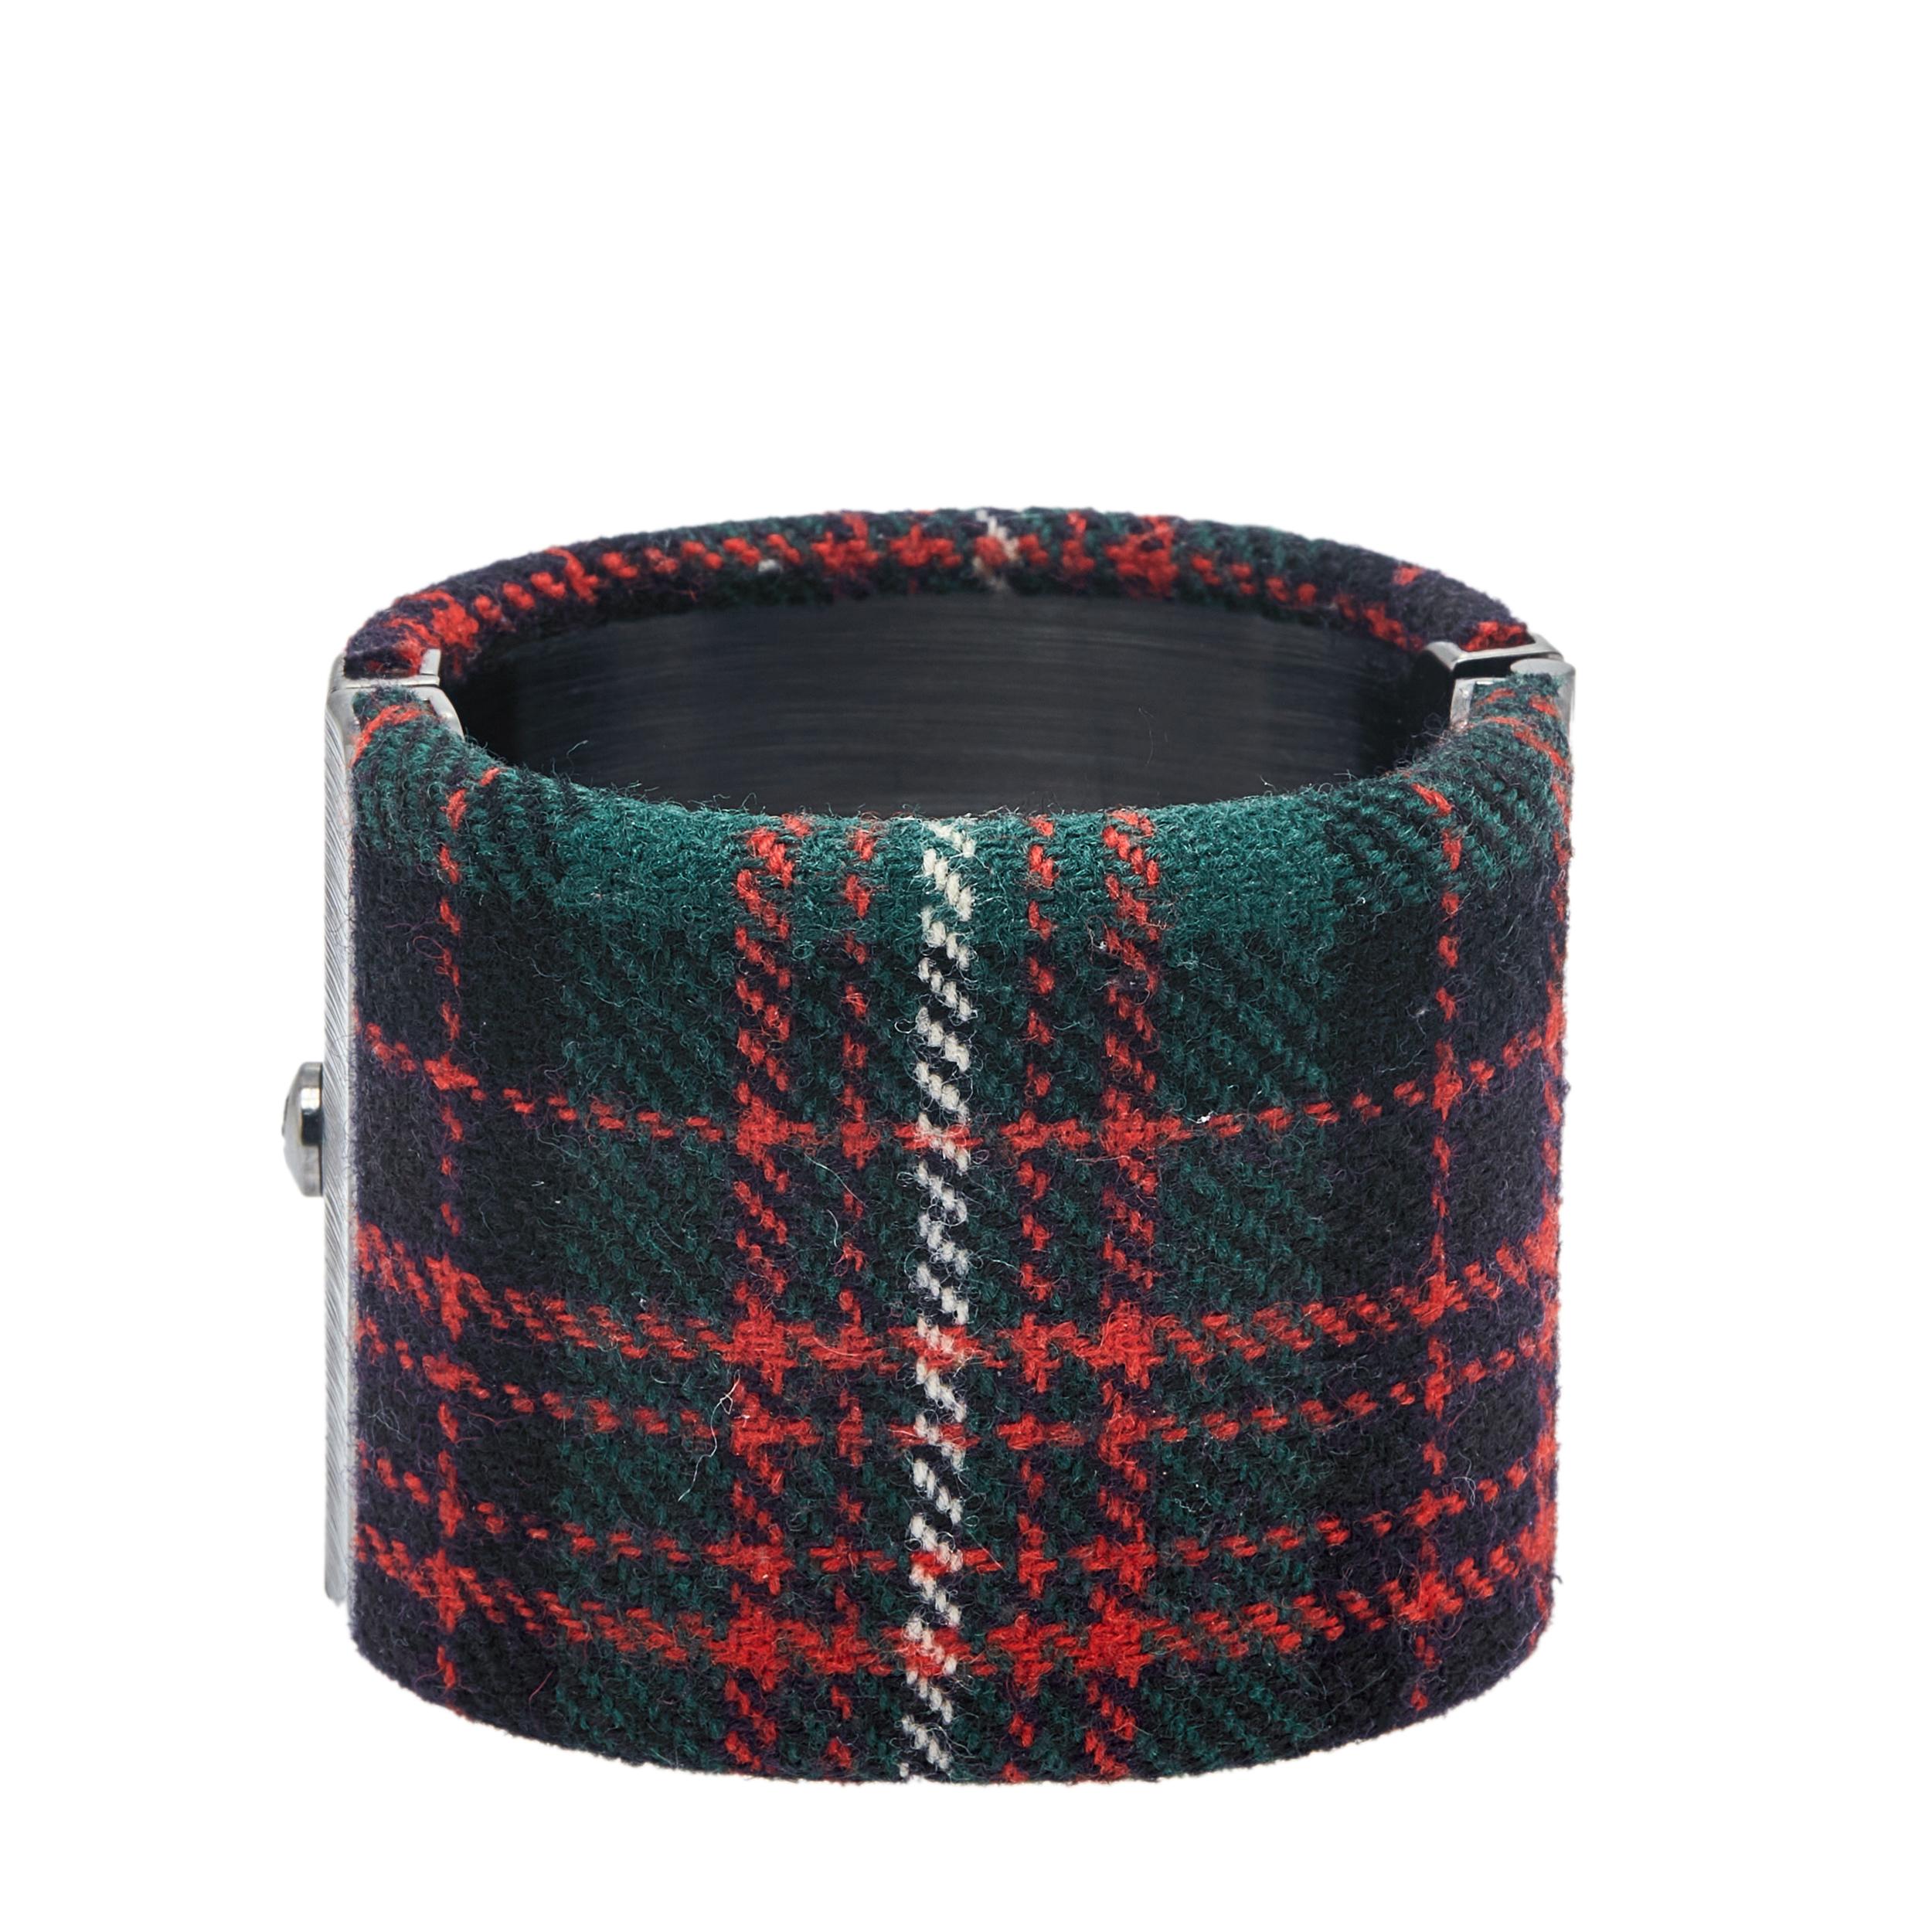 This cuff bracelet from Chanel, exuding a classic and feminine appeal, will be your new favorite statement accessory. It has a rock-chic design with an accentuating logo on the front featuring interlocking CCs. The tartan fabric body which is in